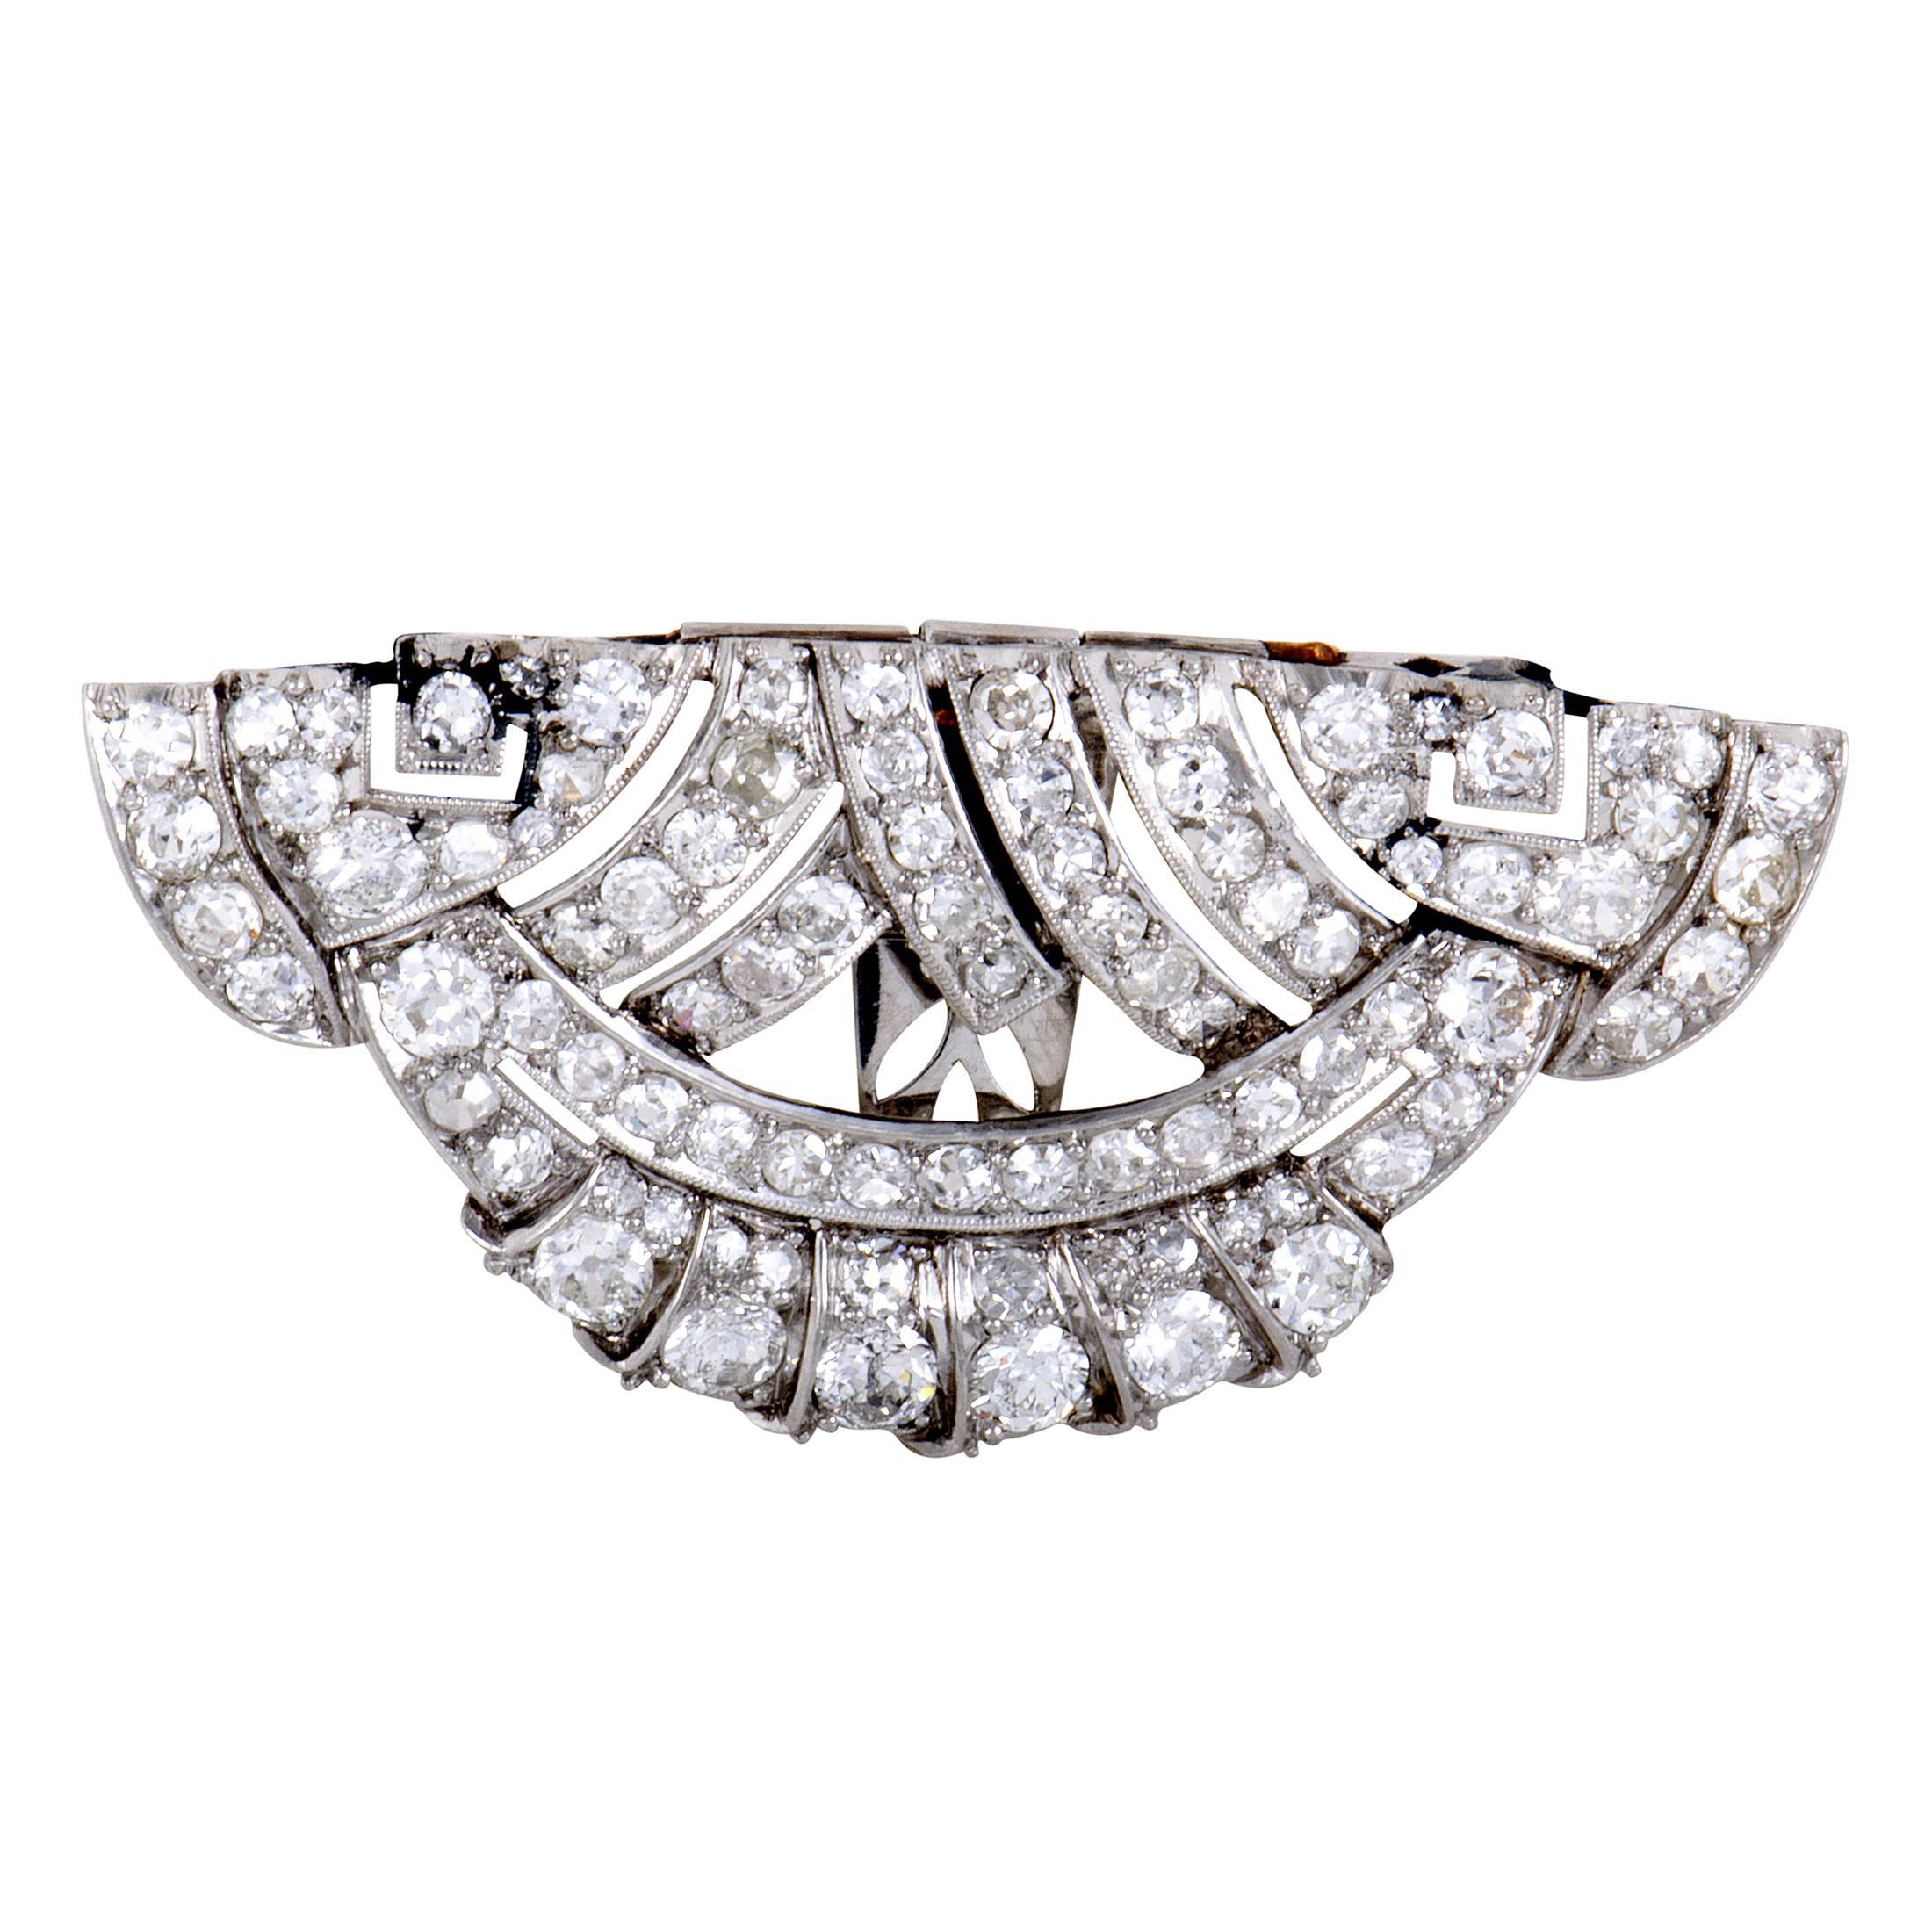 Resplendent prestige and exceptional ornamentation meet in these fascinating clips which are made of expertly crafted platinum and set with lustrous diamonds weighing in total approximately 8.00 carats for an astonishing sight.